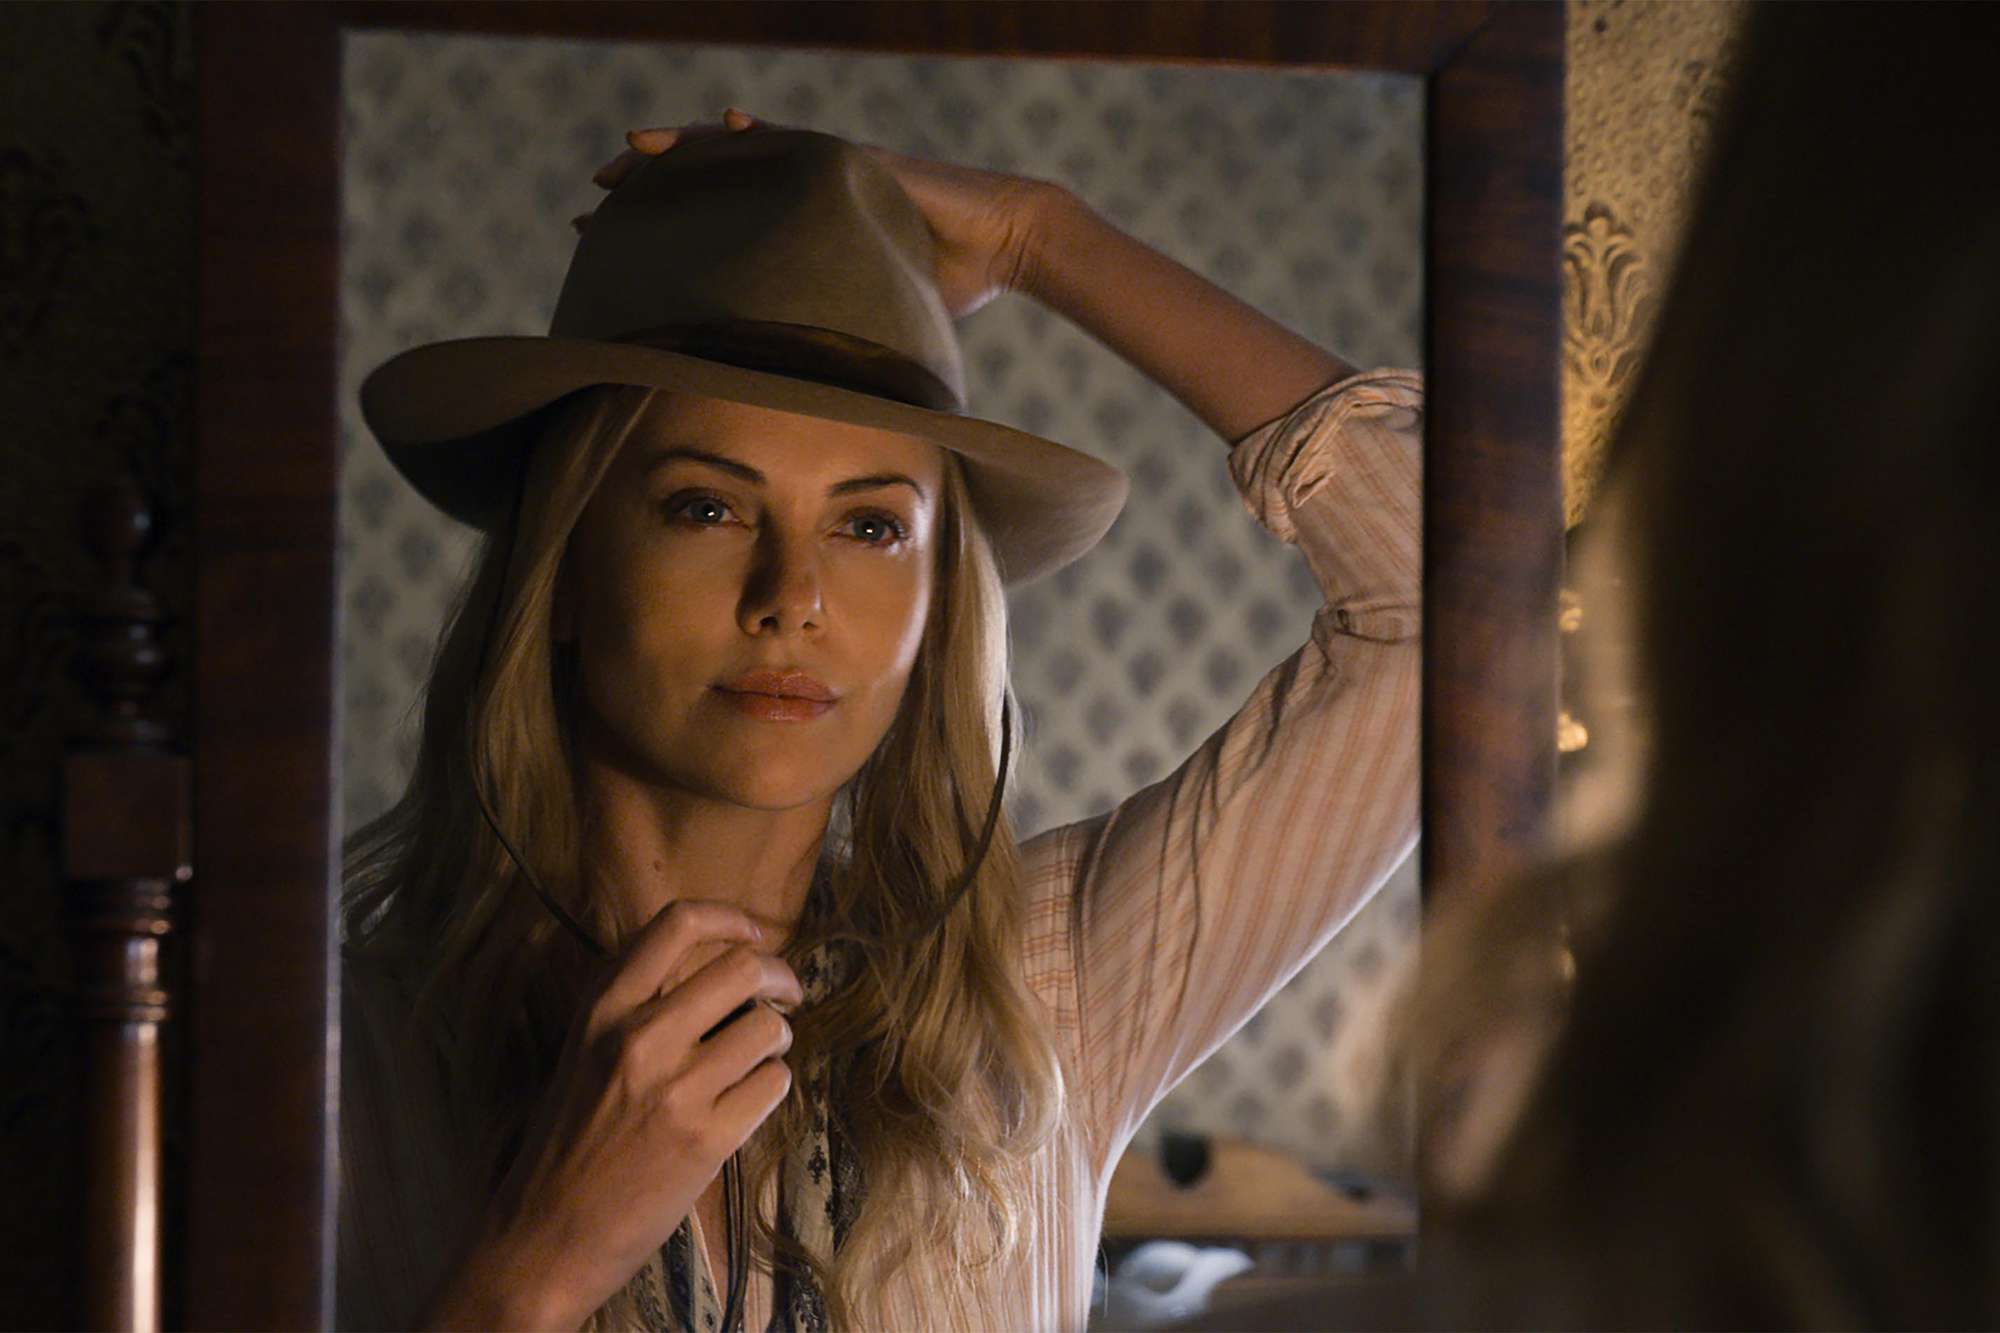 Charlize Theron in 'A Million Ways to Die in the West'.